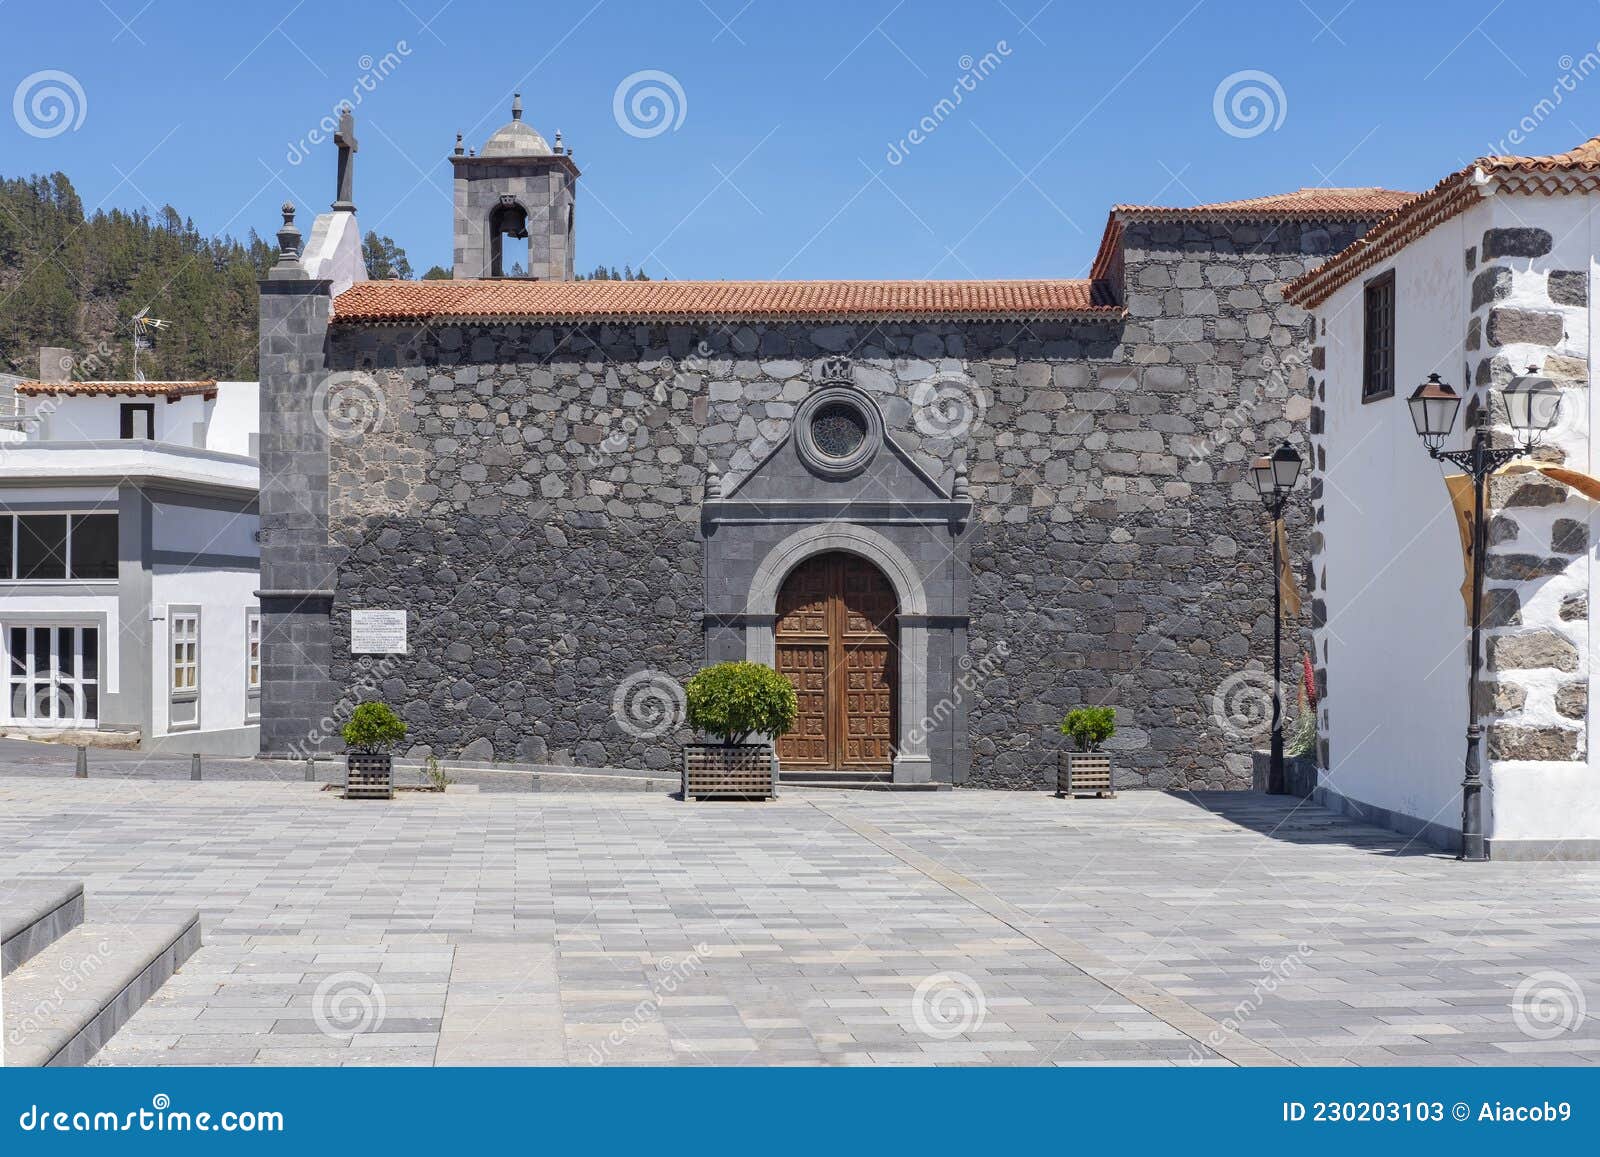 lateral views of the church known as sanctuary of the santo hermano pedro situated in vilaflor, tenerife, spain